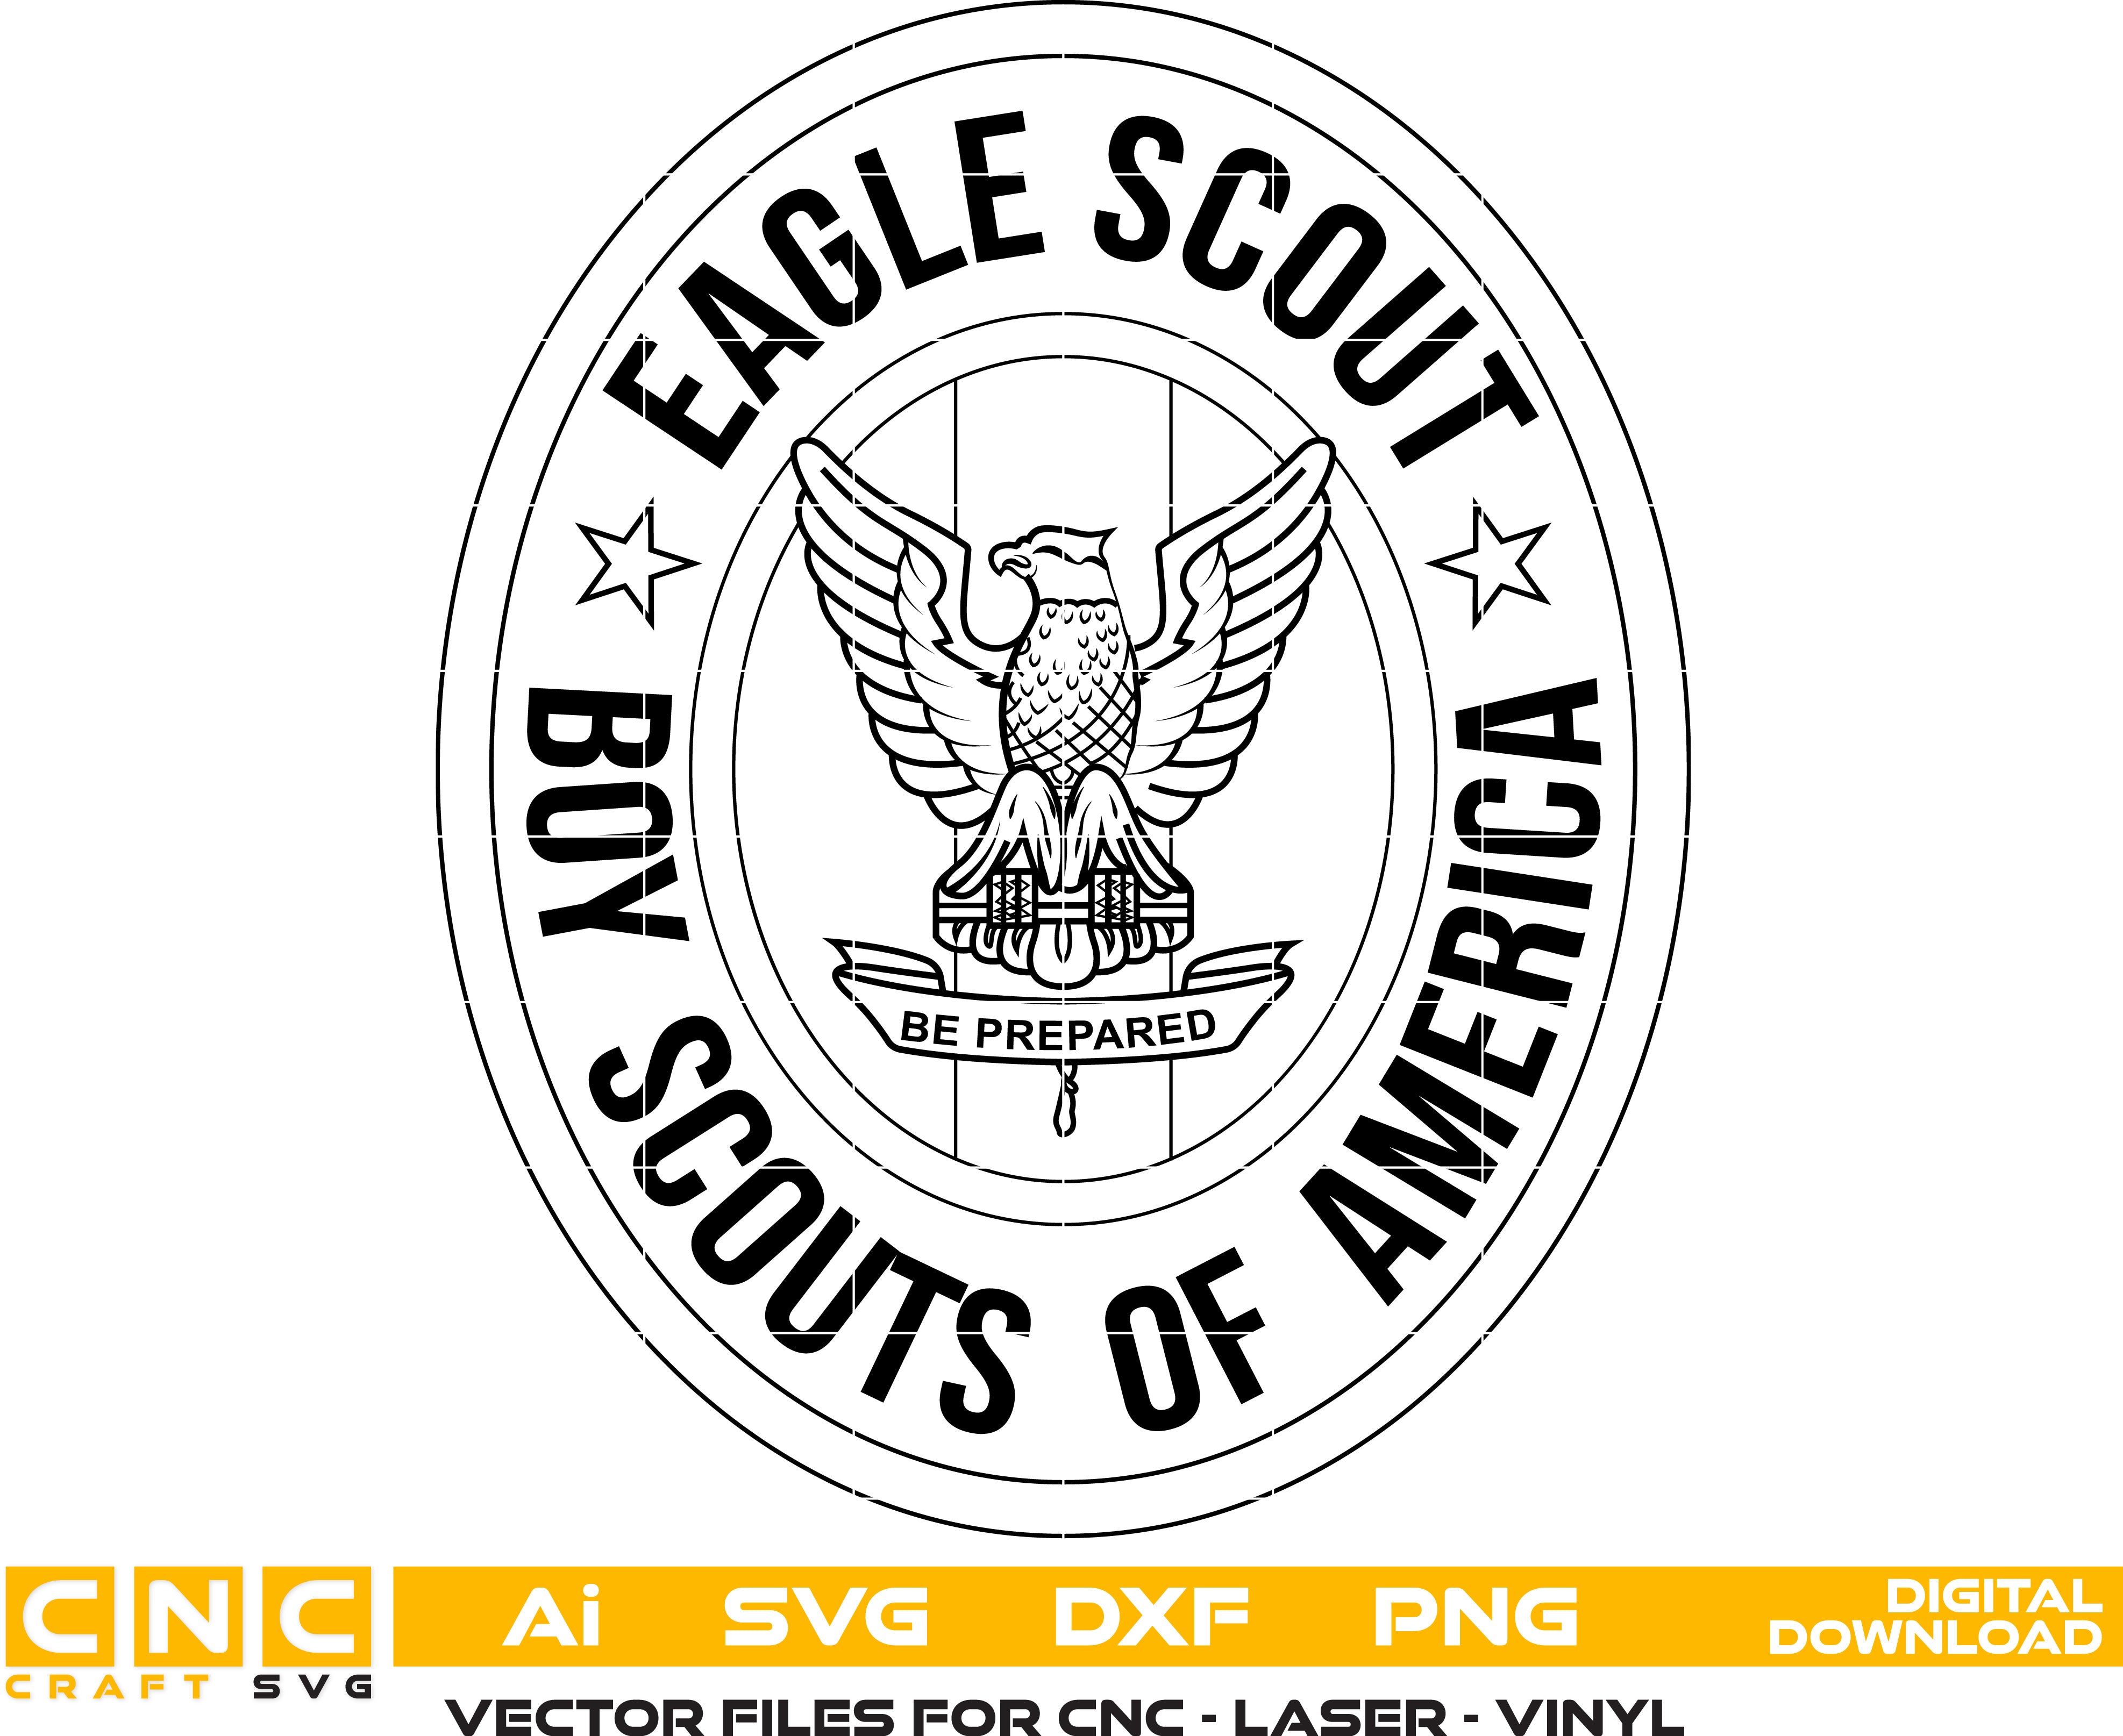 Boy Scouts of America Vector Art, Ai,SVG, DXF, PNG, Digital Files for Laser Engraving, Woodworking & Printing